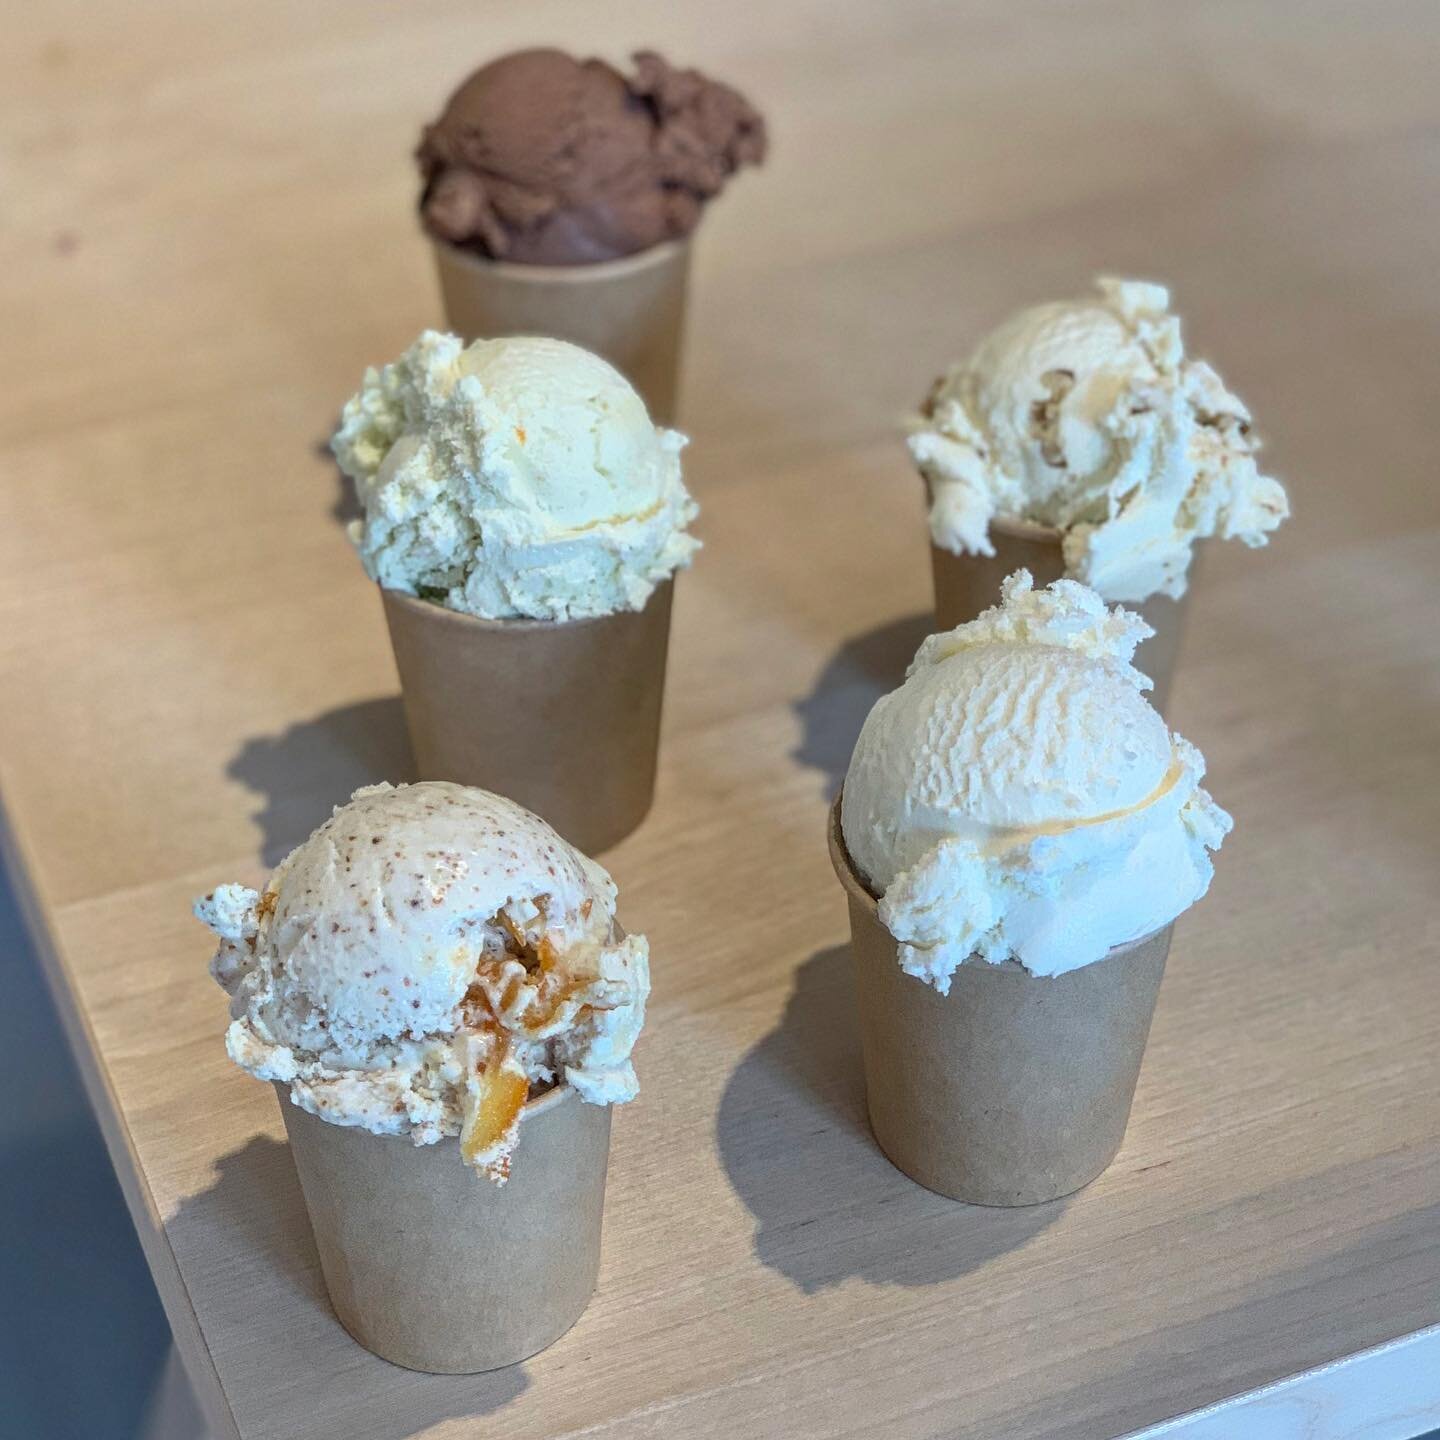 With unique flavors like Chocolate Soba and Miso Walnut, this ice cream shop is focused on offering untraditional flavors that highlight the beauty of distinct ingredients. We couldn&rsquo;t just get one 😋

This Weeks Ice Cream Crush: Good Gang Ice 